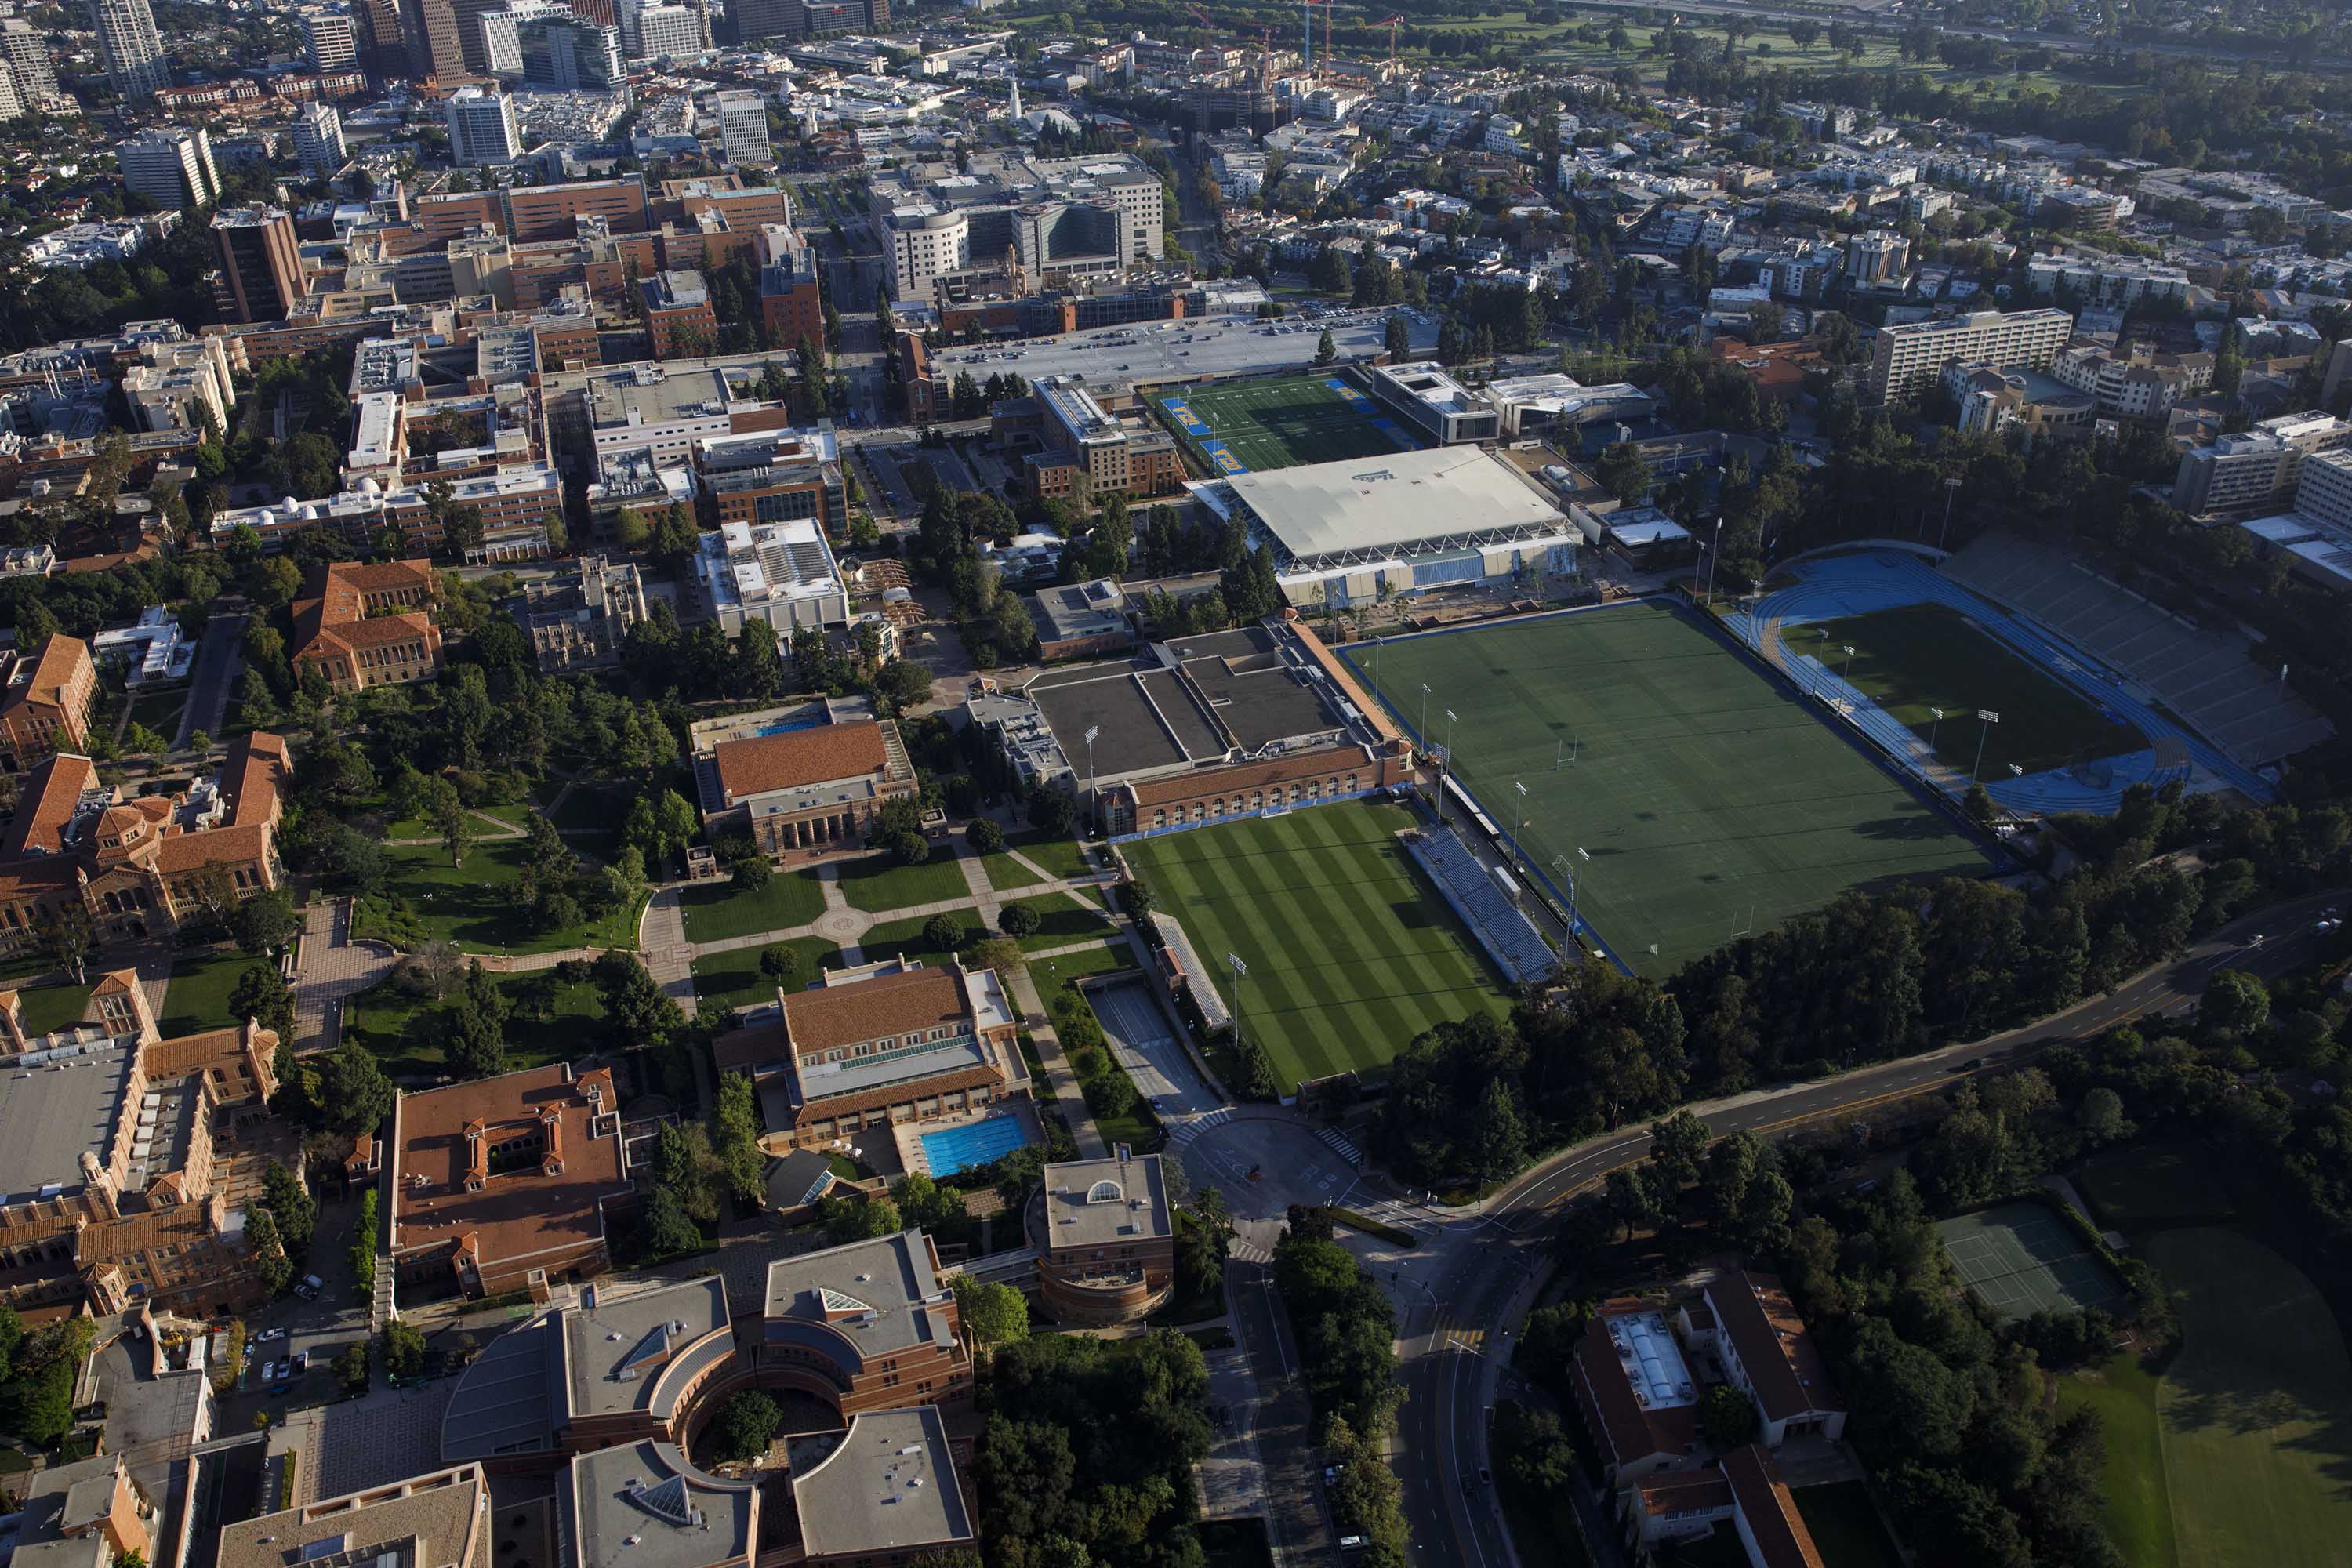 The University of California Los Angeles (UCLA) campus is pictured from above on May 1. 